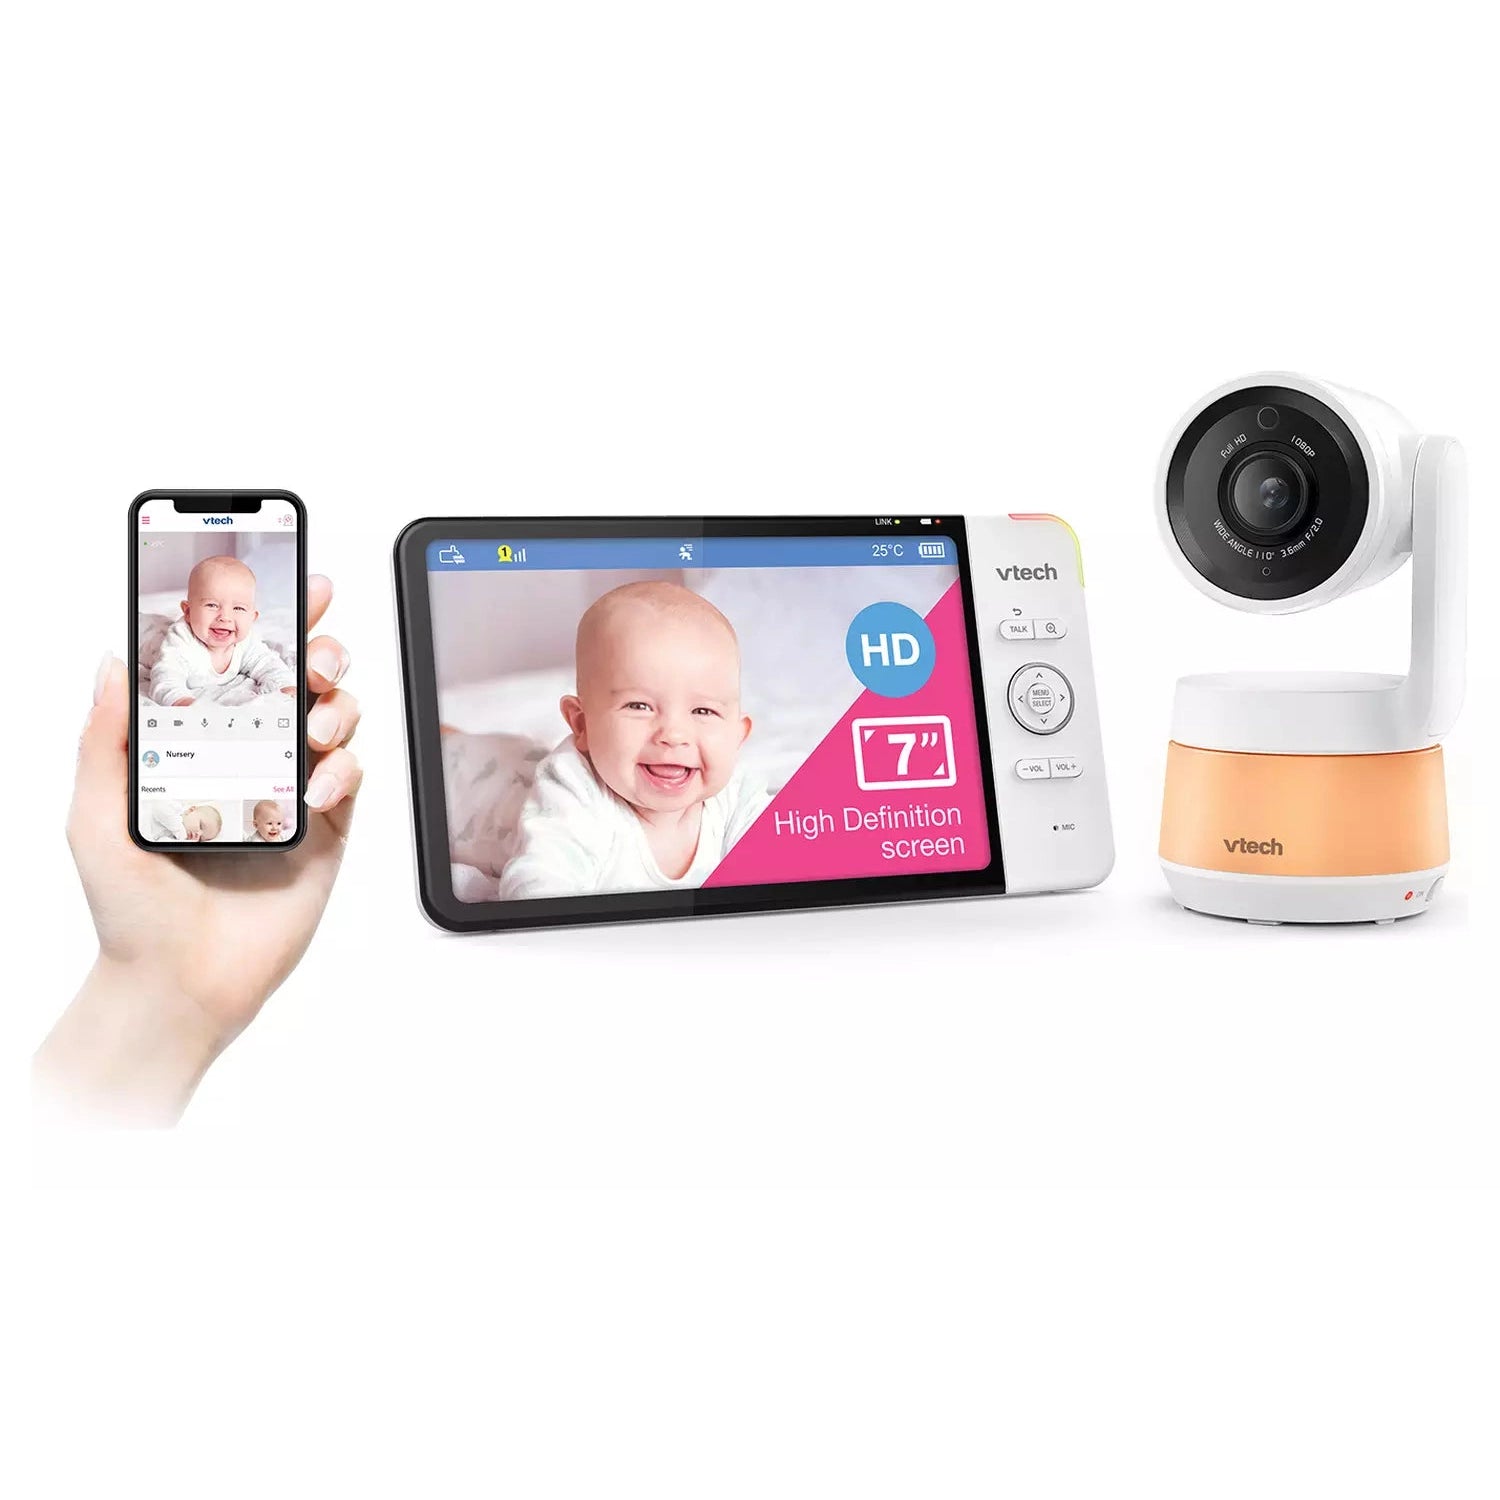 VTech RM7767HD Smart Video Baby Monitor - White - Refurbished Excellent